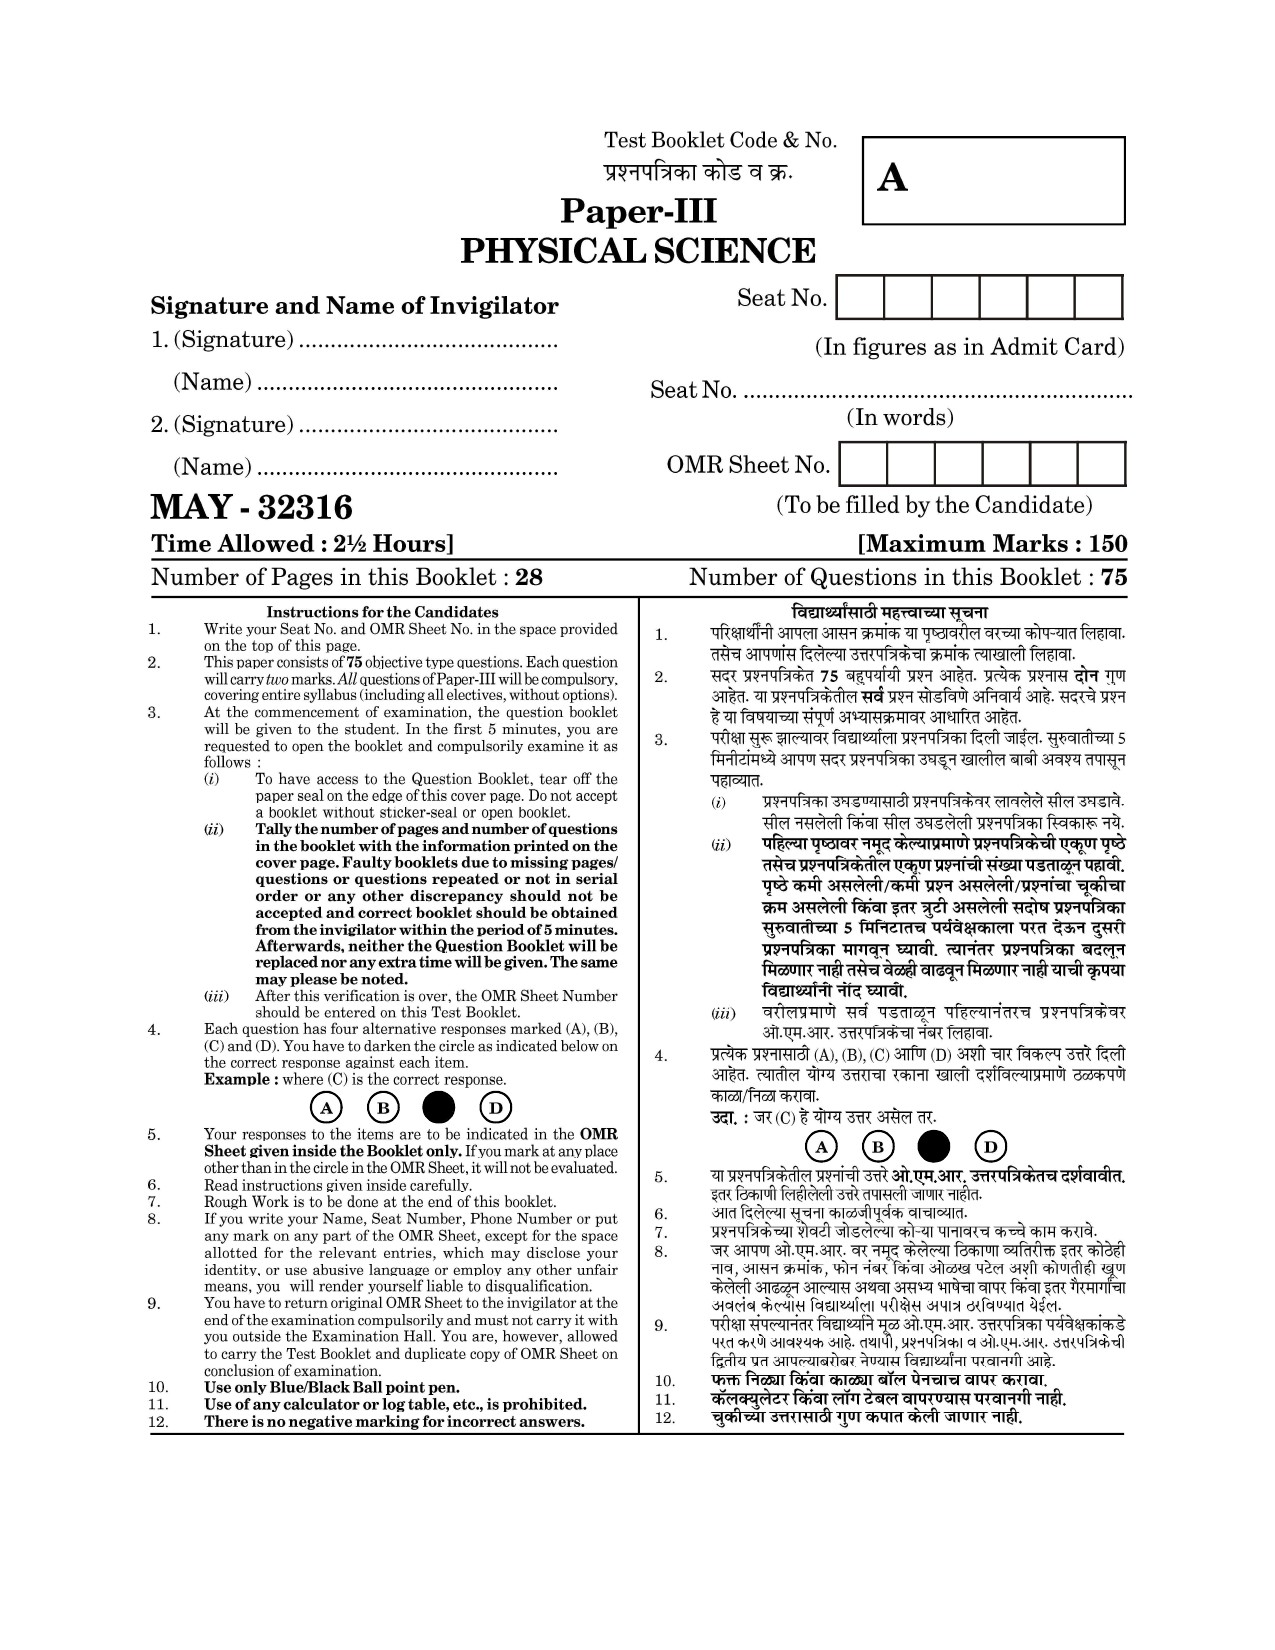 Maharashtra SET Physical Science Question Paper III May 2016 1